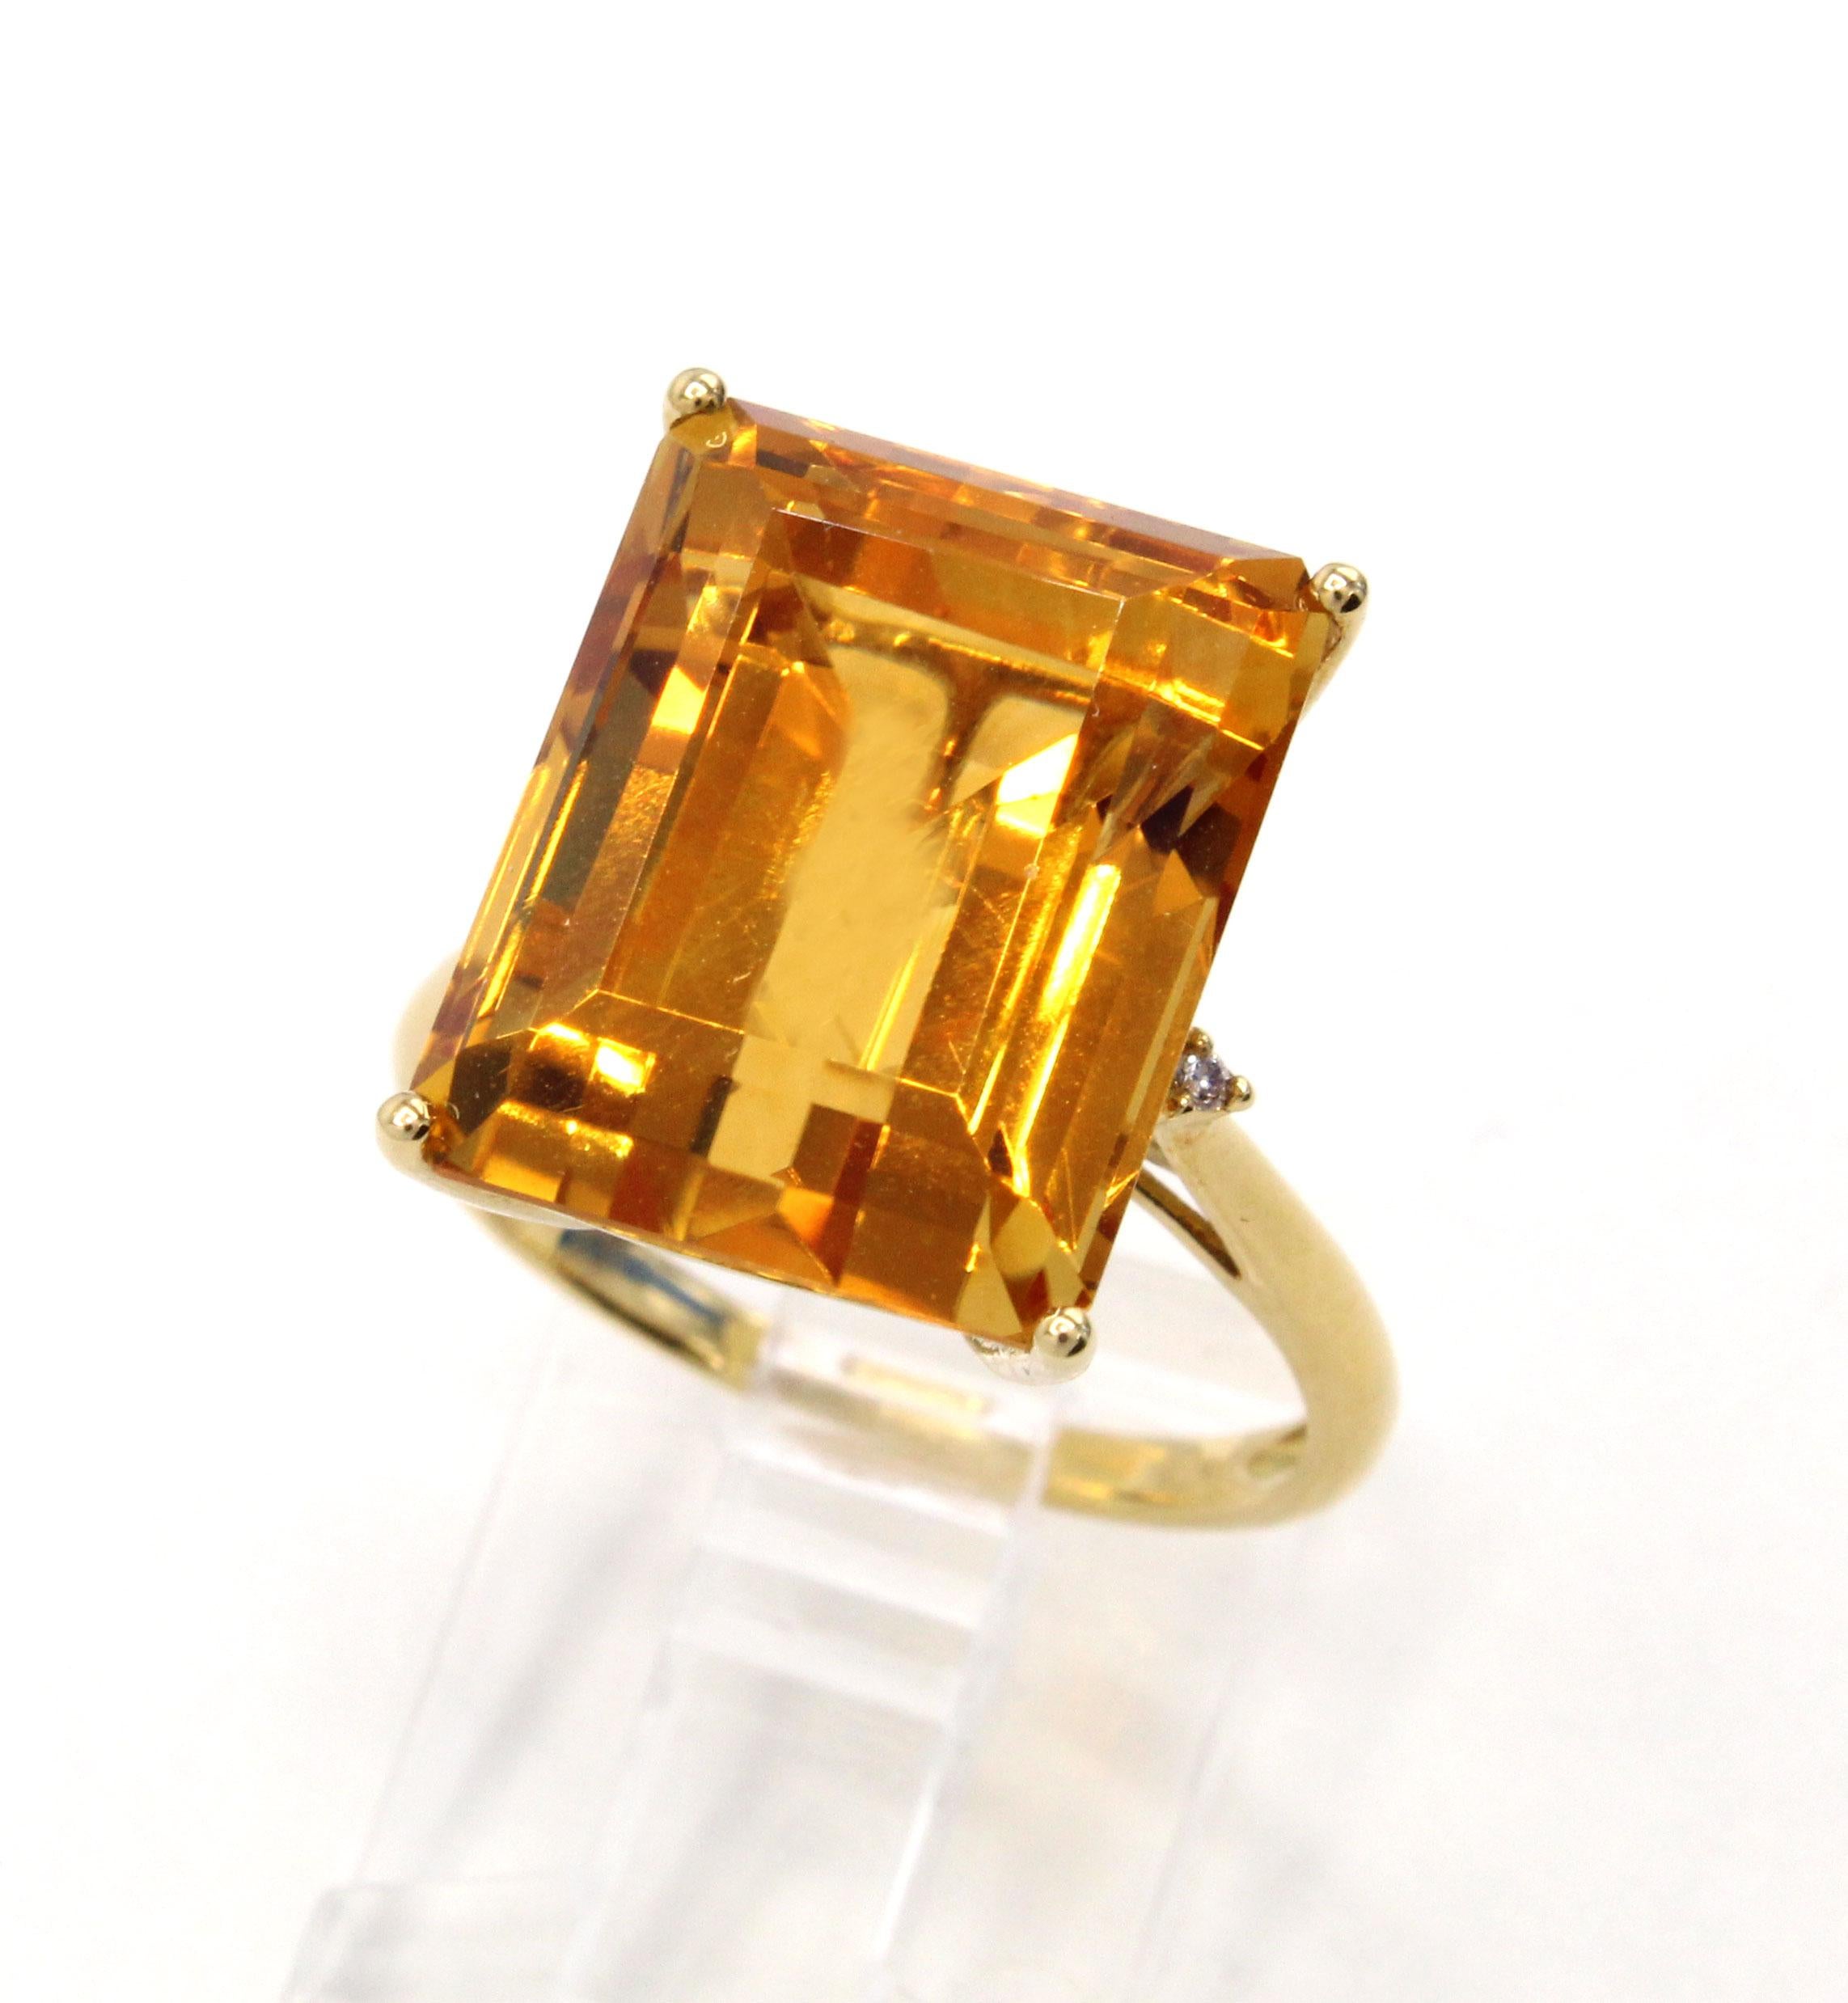 Cut into a perfect emerald cut, this Golden Citrine is the center-piece of this well handcrafted 18 karat yellow gold 1980s ring. The well saturated gemstone, which measures to weigh approximately 10 carats is full of life and fire. This chic and